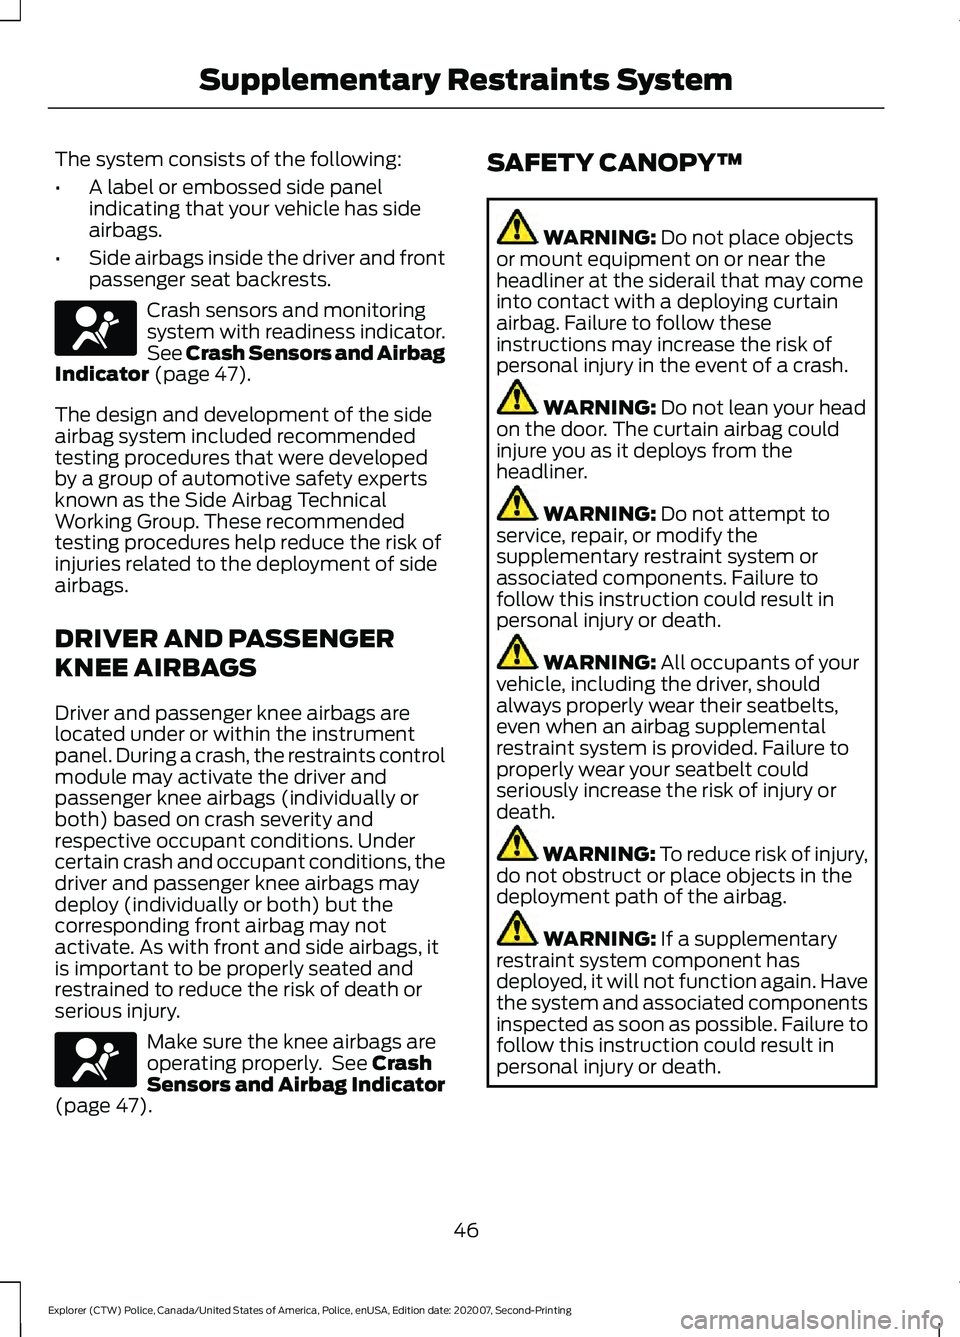 FORD POLICE INTERCEPTOR 2021 Service Manual The system consists of the following:
•
A label or embossed side panel
indicating that your vehicle has side
airbags.
• Side airbags inside the driver and front
passenger seat backrests. Crash sen